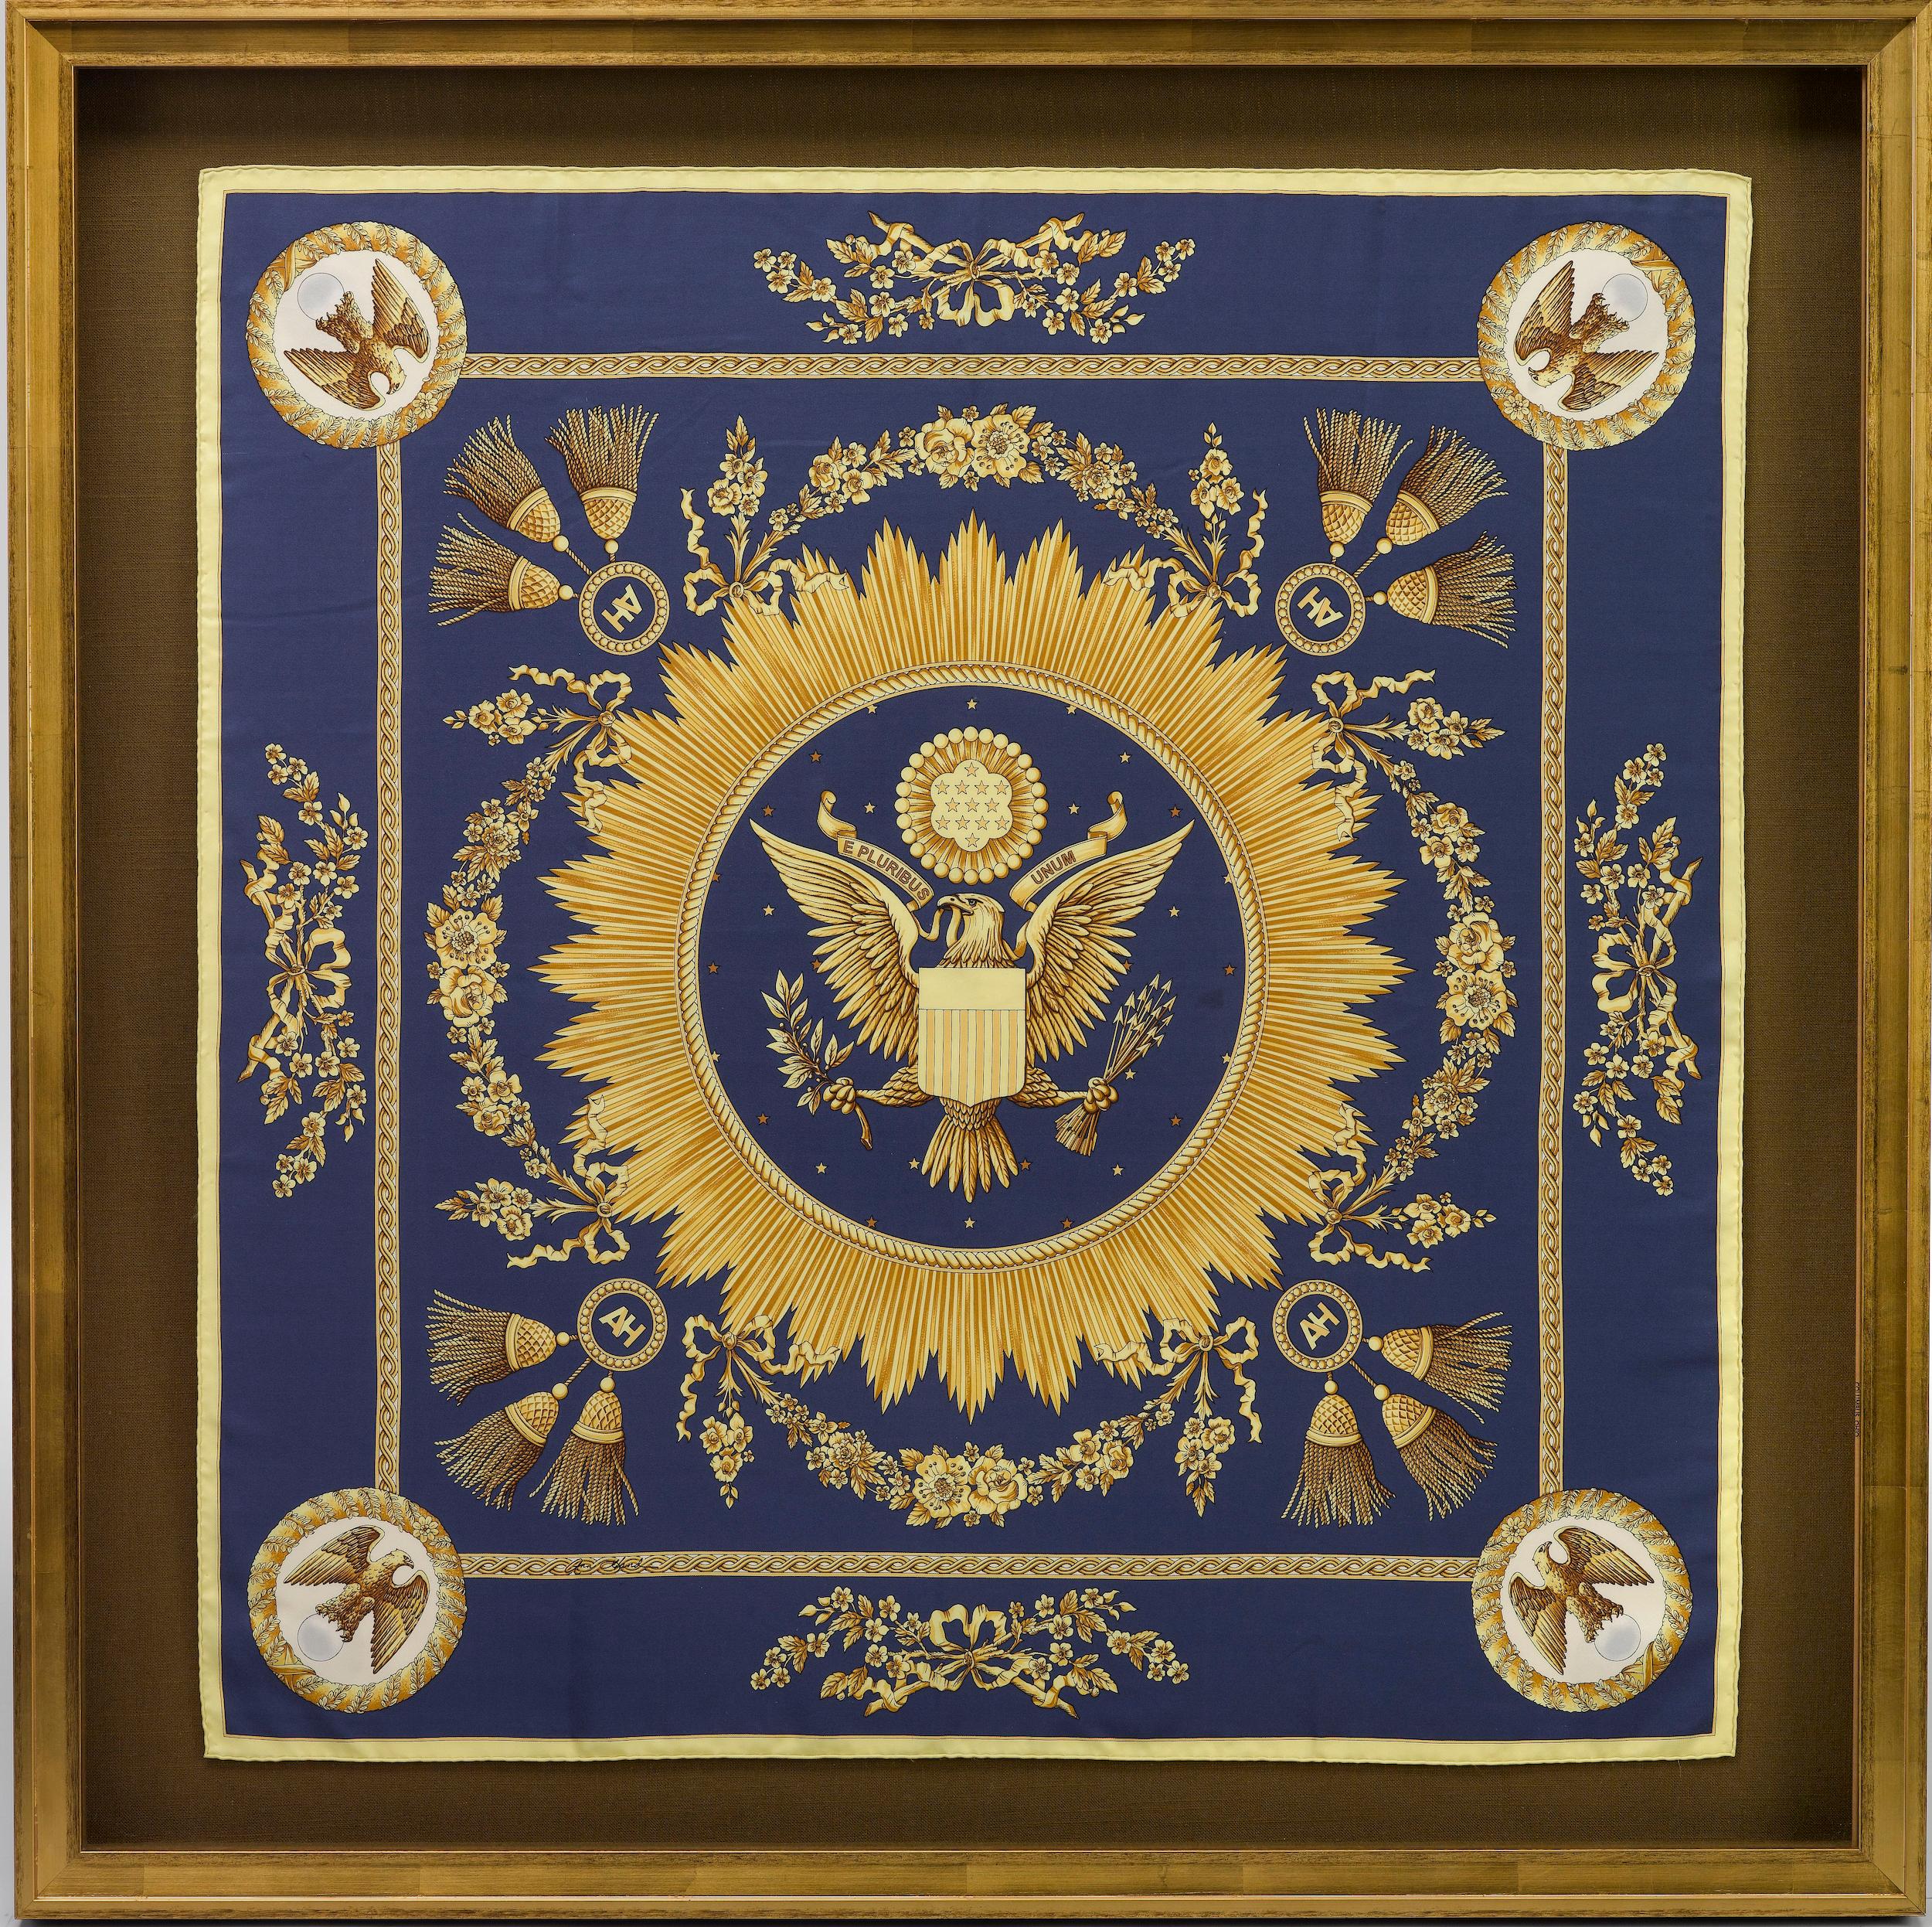 This is a coveted, patriotic silk scarf, issued by American designer Ann Hand. The silk scarf was issued in a deep navy and gold colorway. At center is an artistic interpretation of the Great Seal of the United States. The Great Seal is set in a